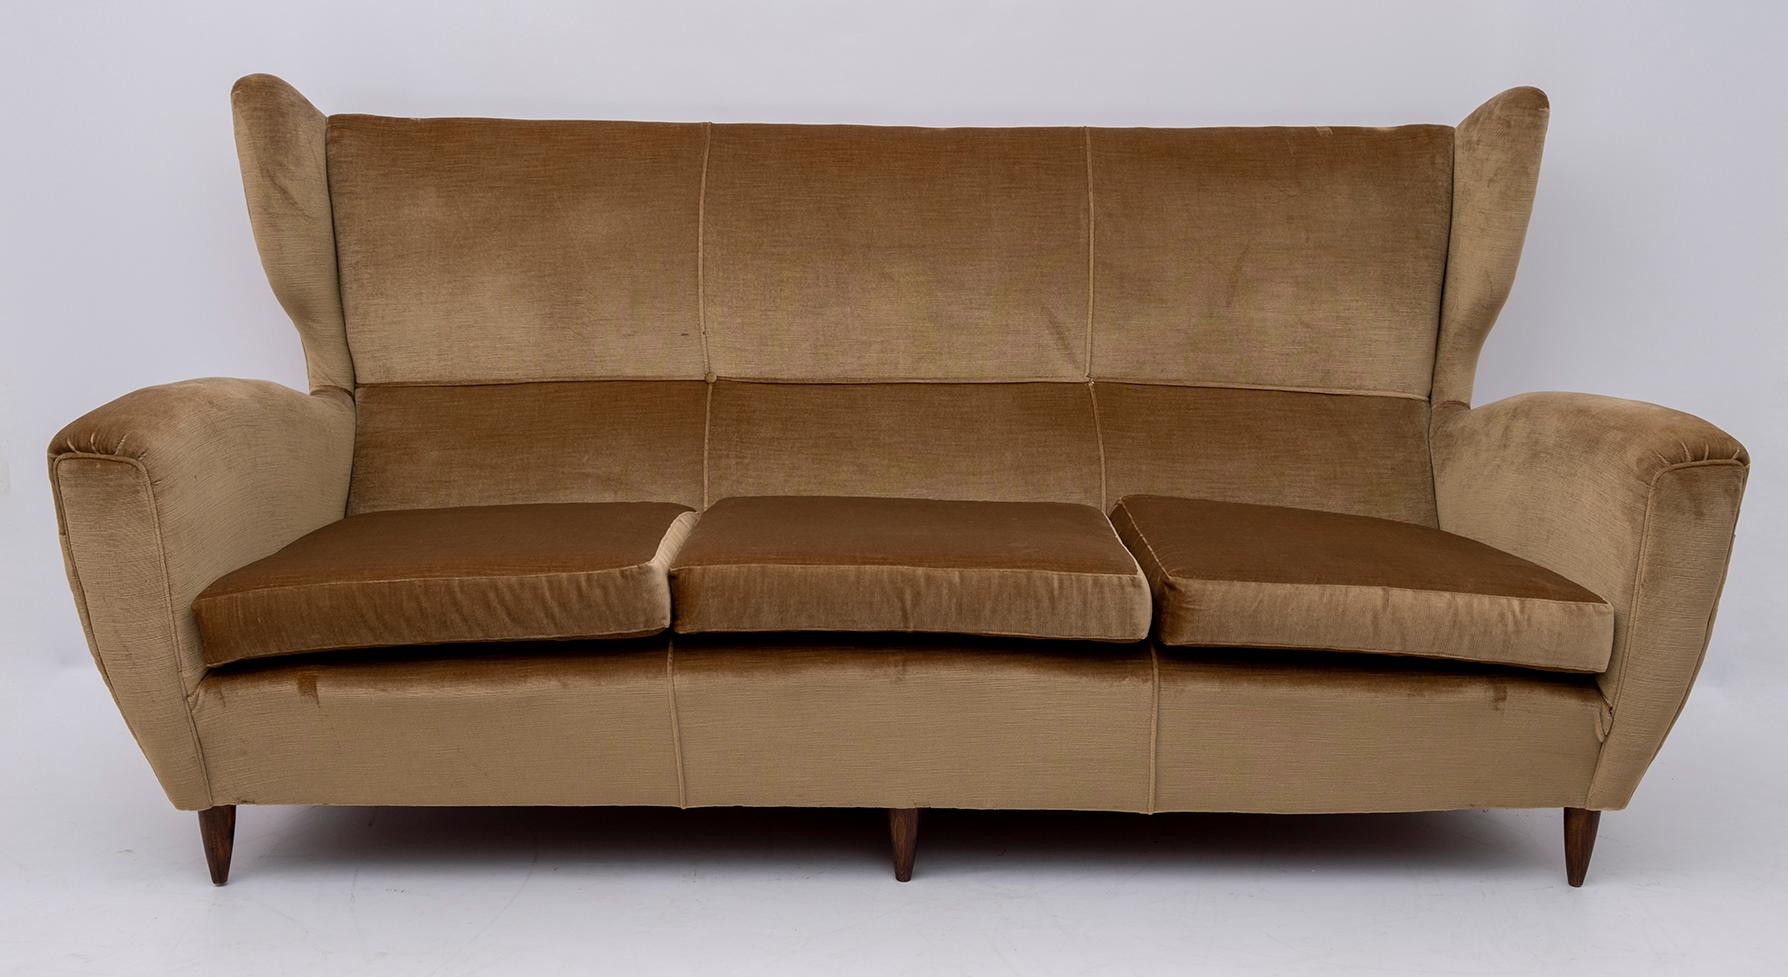 1950s style couch